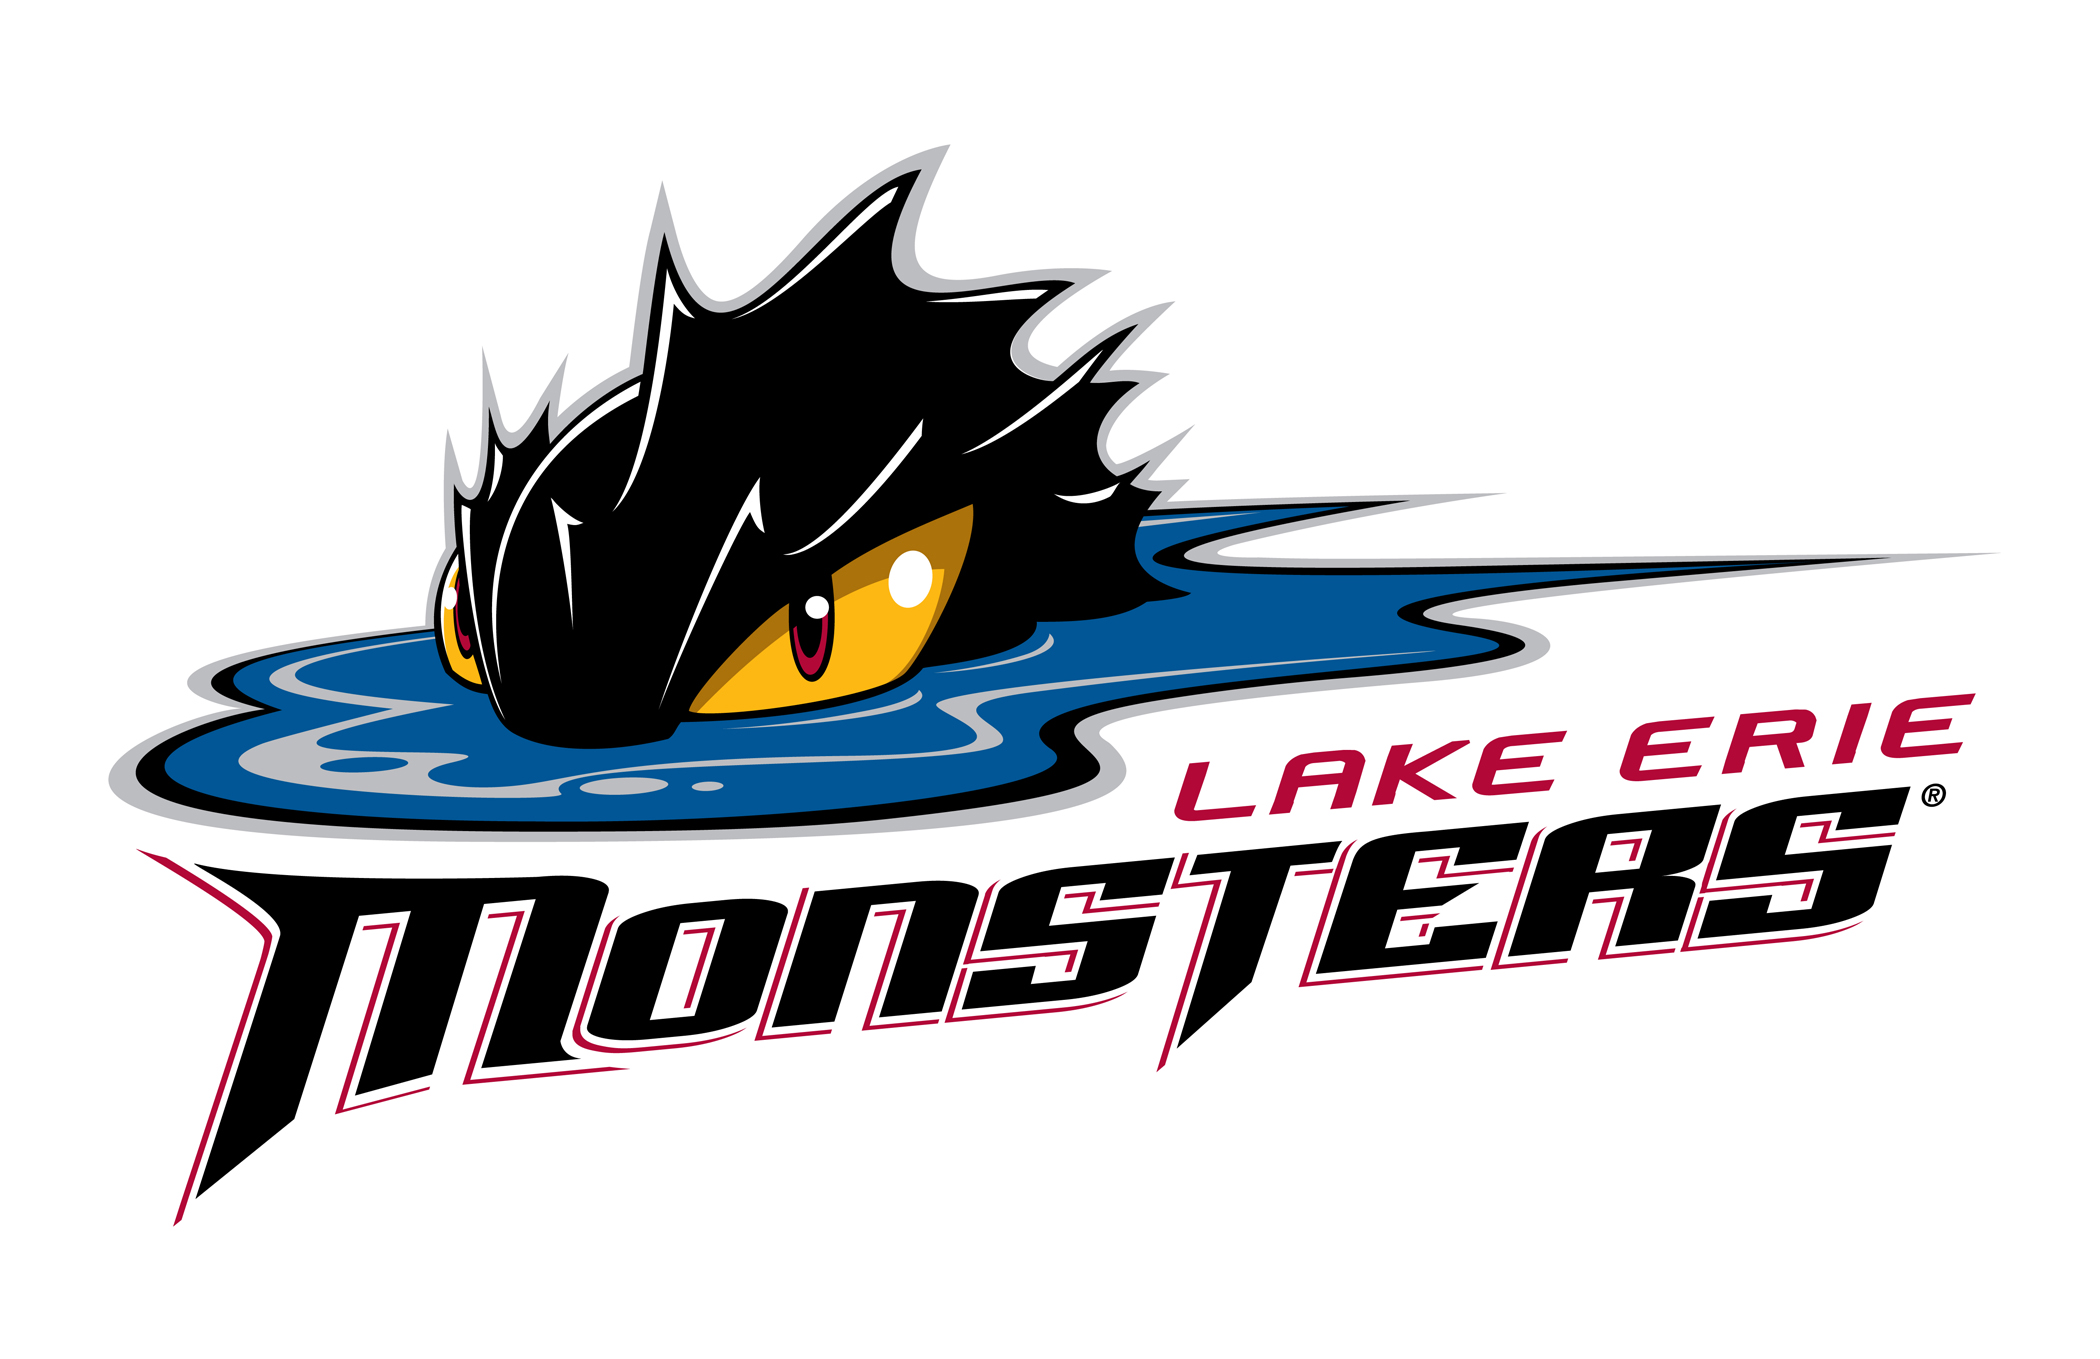 1000+ images about Lake erie monsters